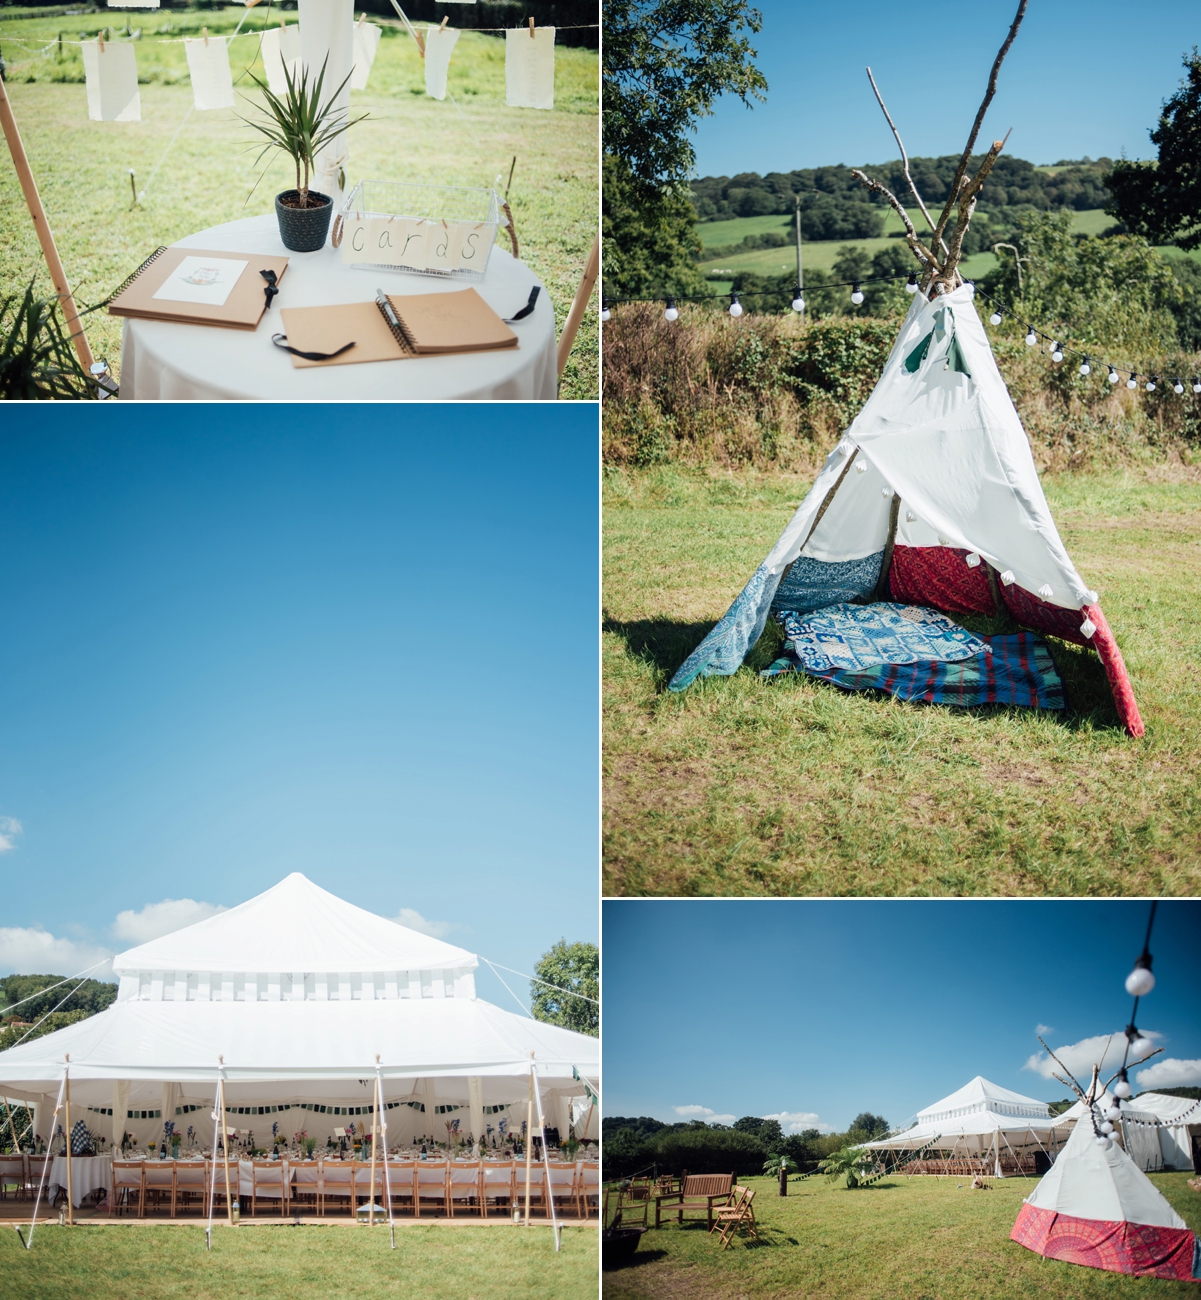 7 A handmade and natural outdoor wedding in Devon